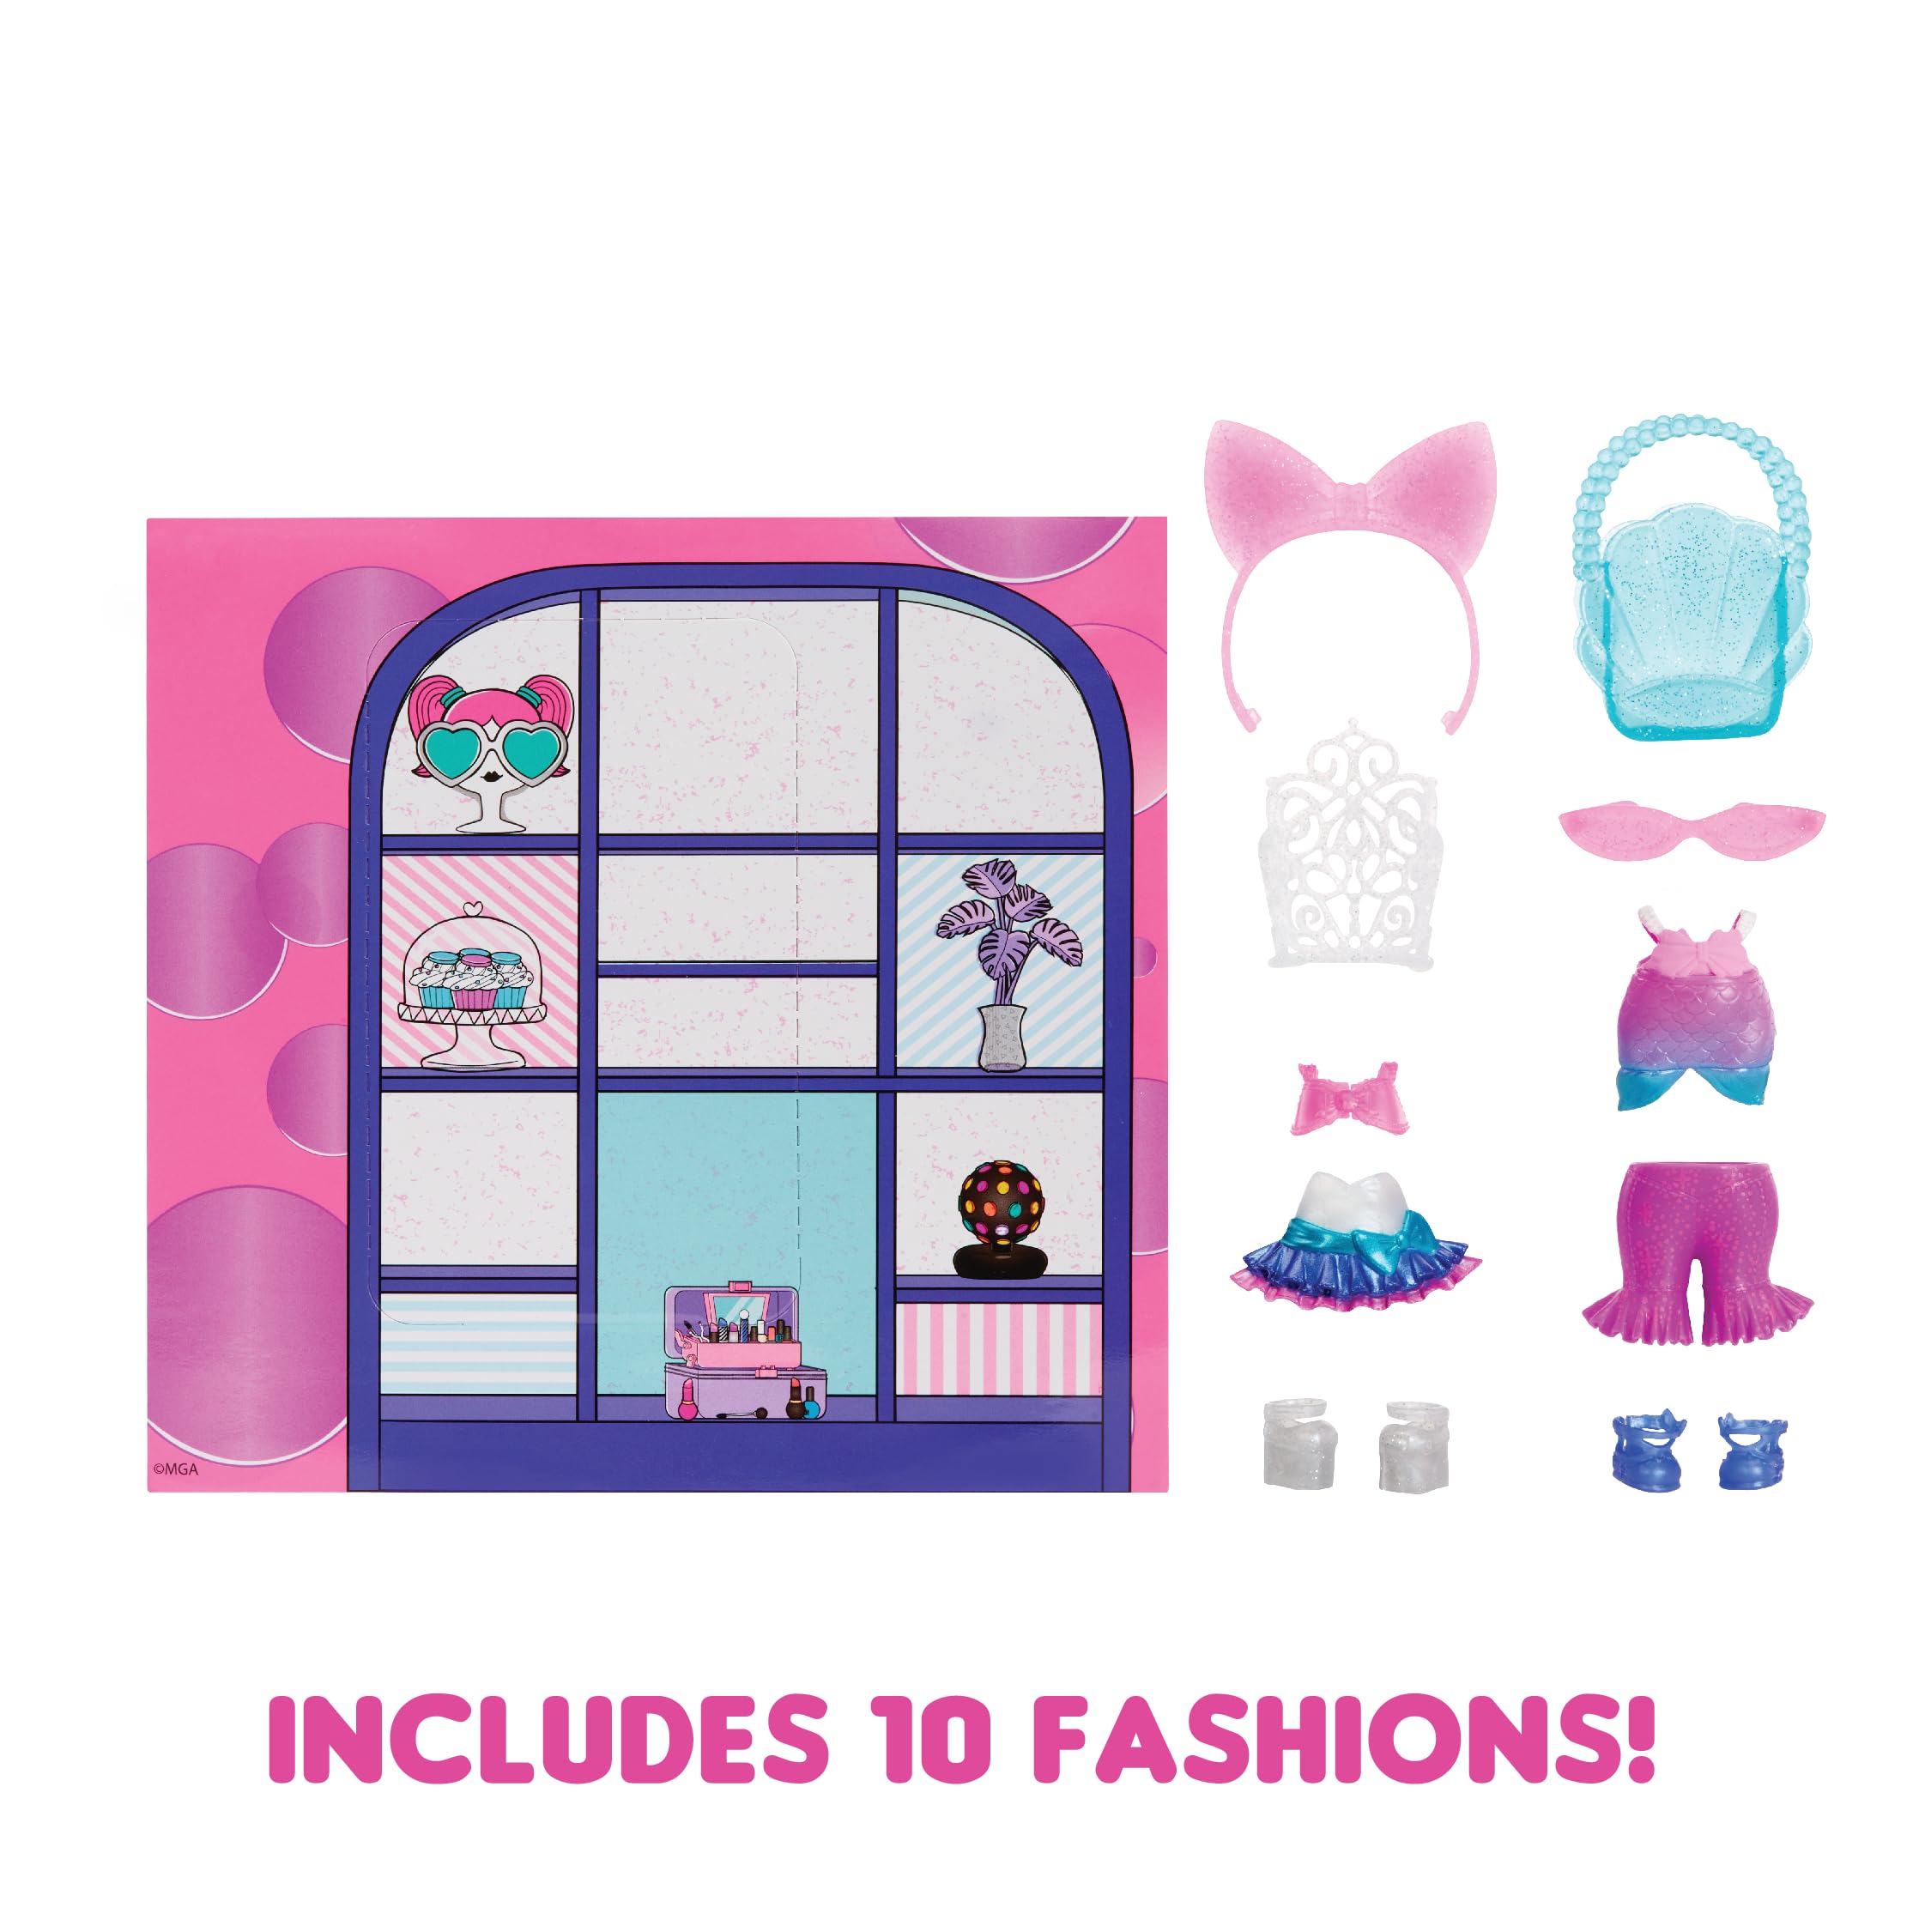 LOL Surprise Fashion Packs Mermaid Princess Style - 6 Unique Styles each with (3) Outfits, (2) Pairs of Shoes, (4) Accessories - Mix and Match Styles to Create Tons of New Looks, Gift for Girls Age 4+